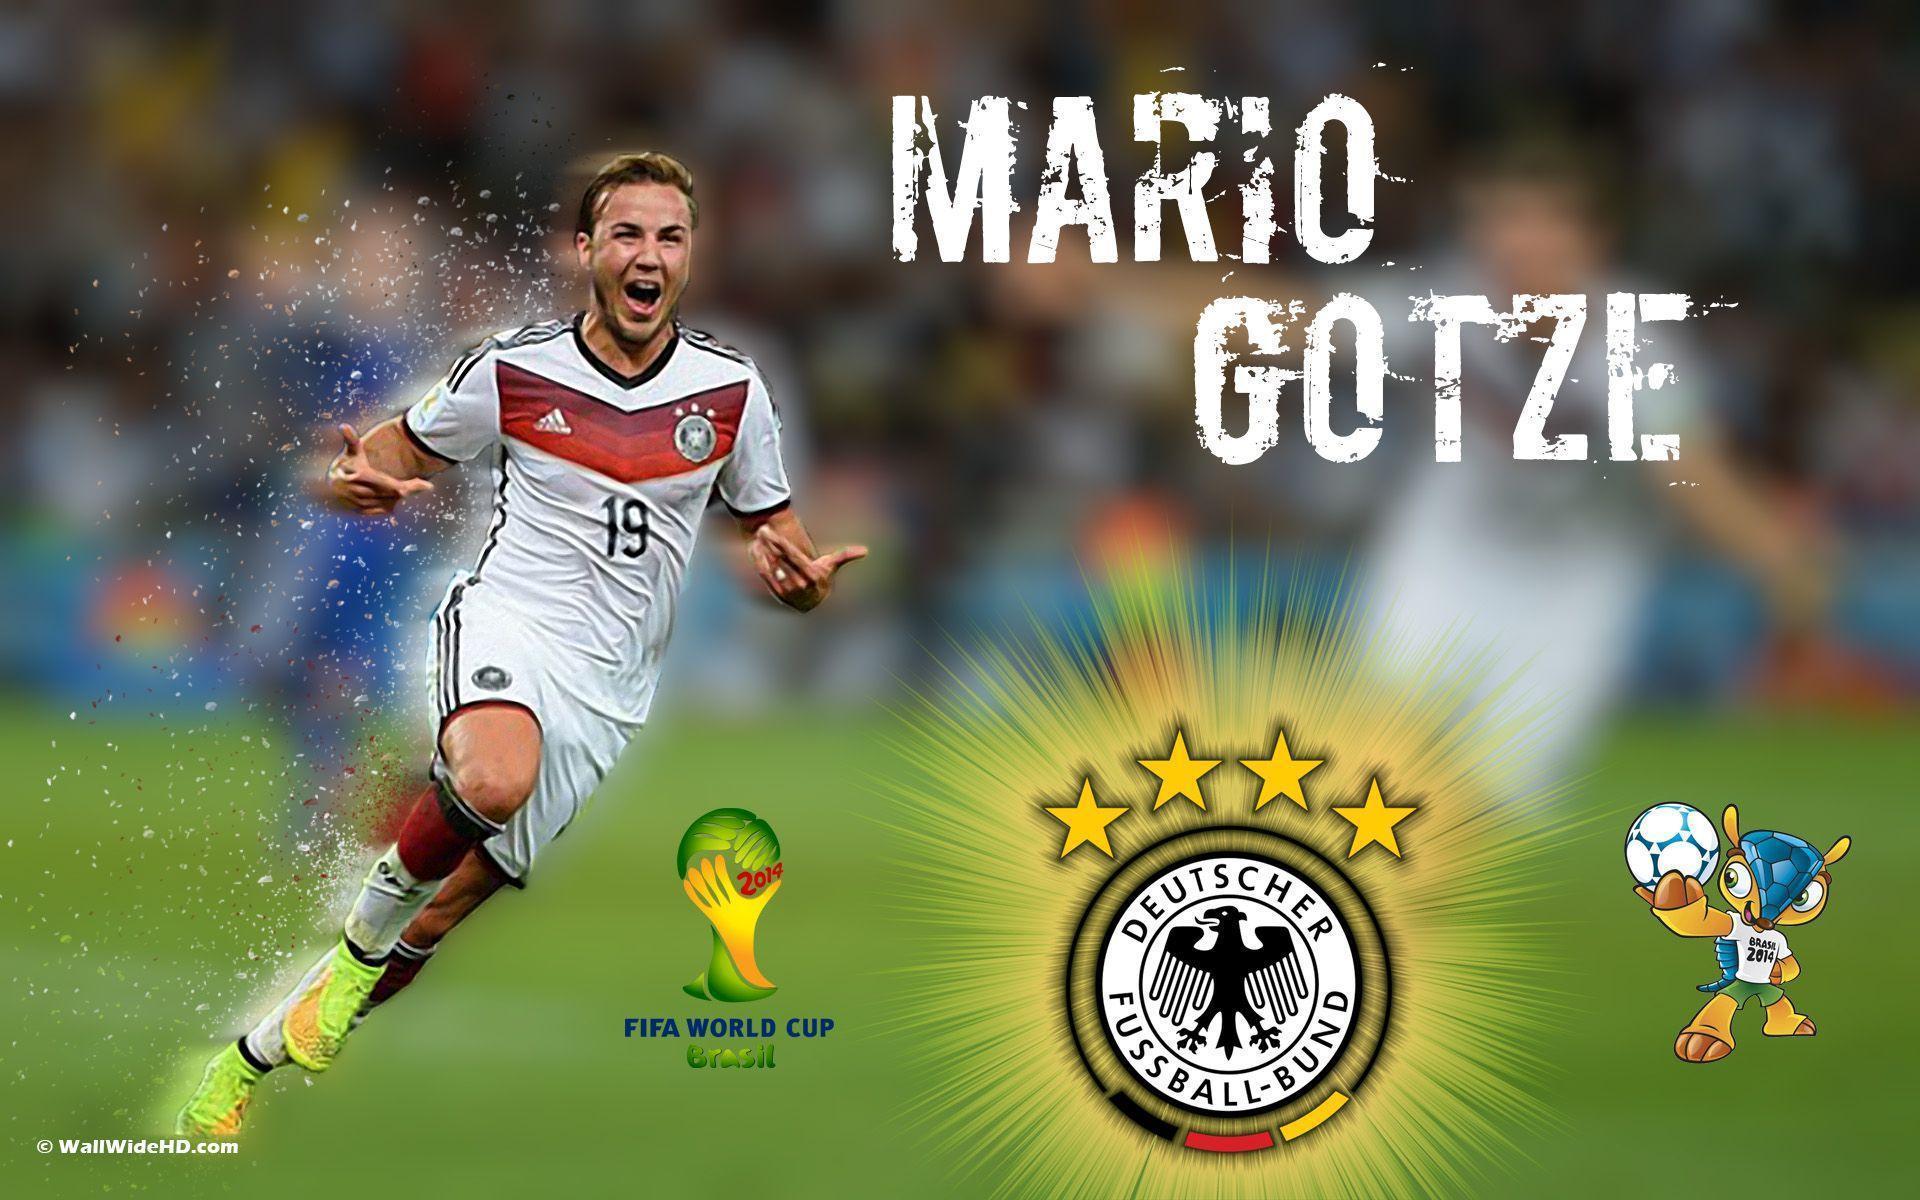 Mario Gotze Wallpaper High Resolution and Quality Download